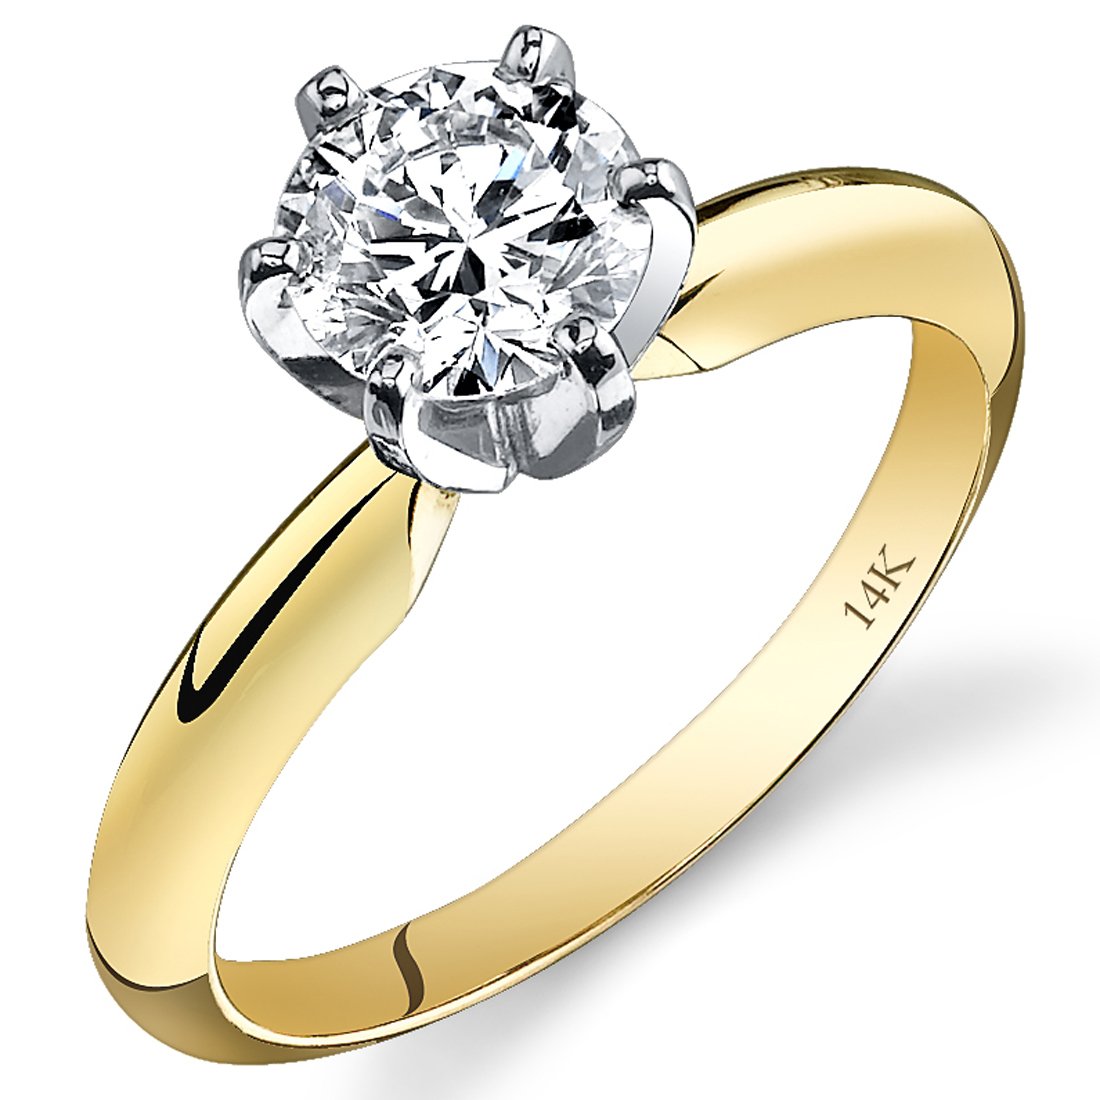 IGI Certified 14K Yellow Gold 1.68 Carats Diamond Engagement Ring G-H Color SI2-I1 Clarity, 2.1mm Band